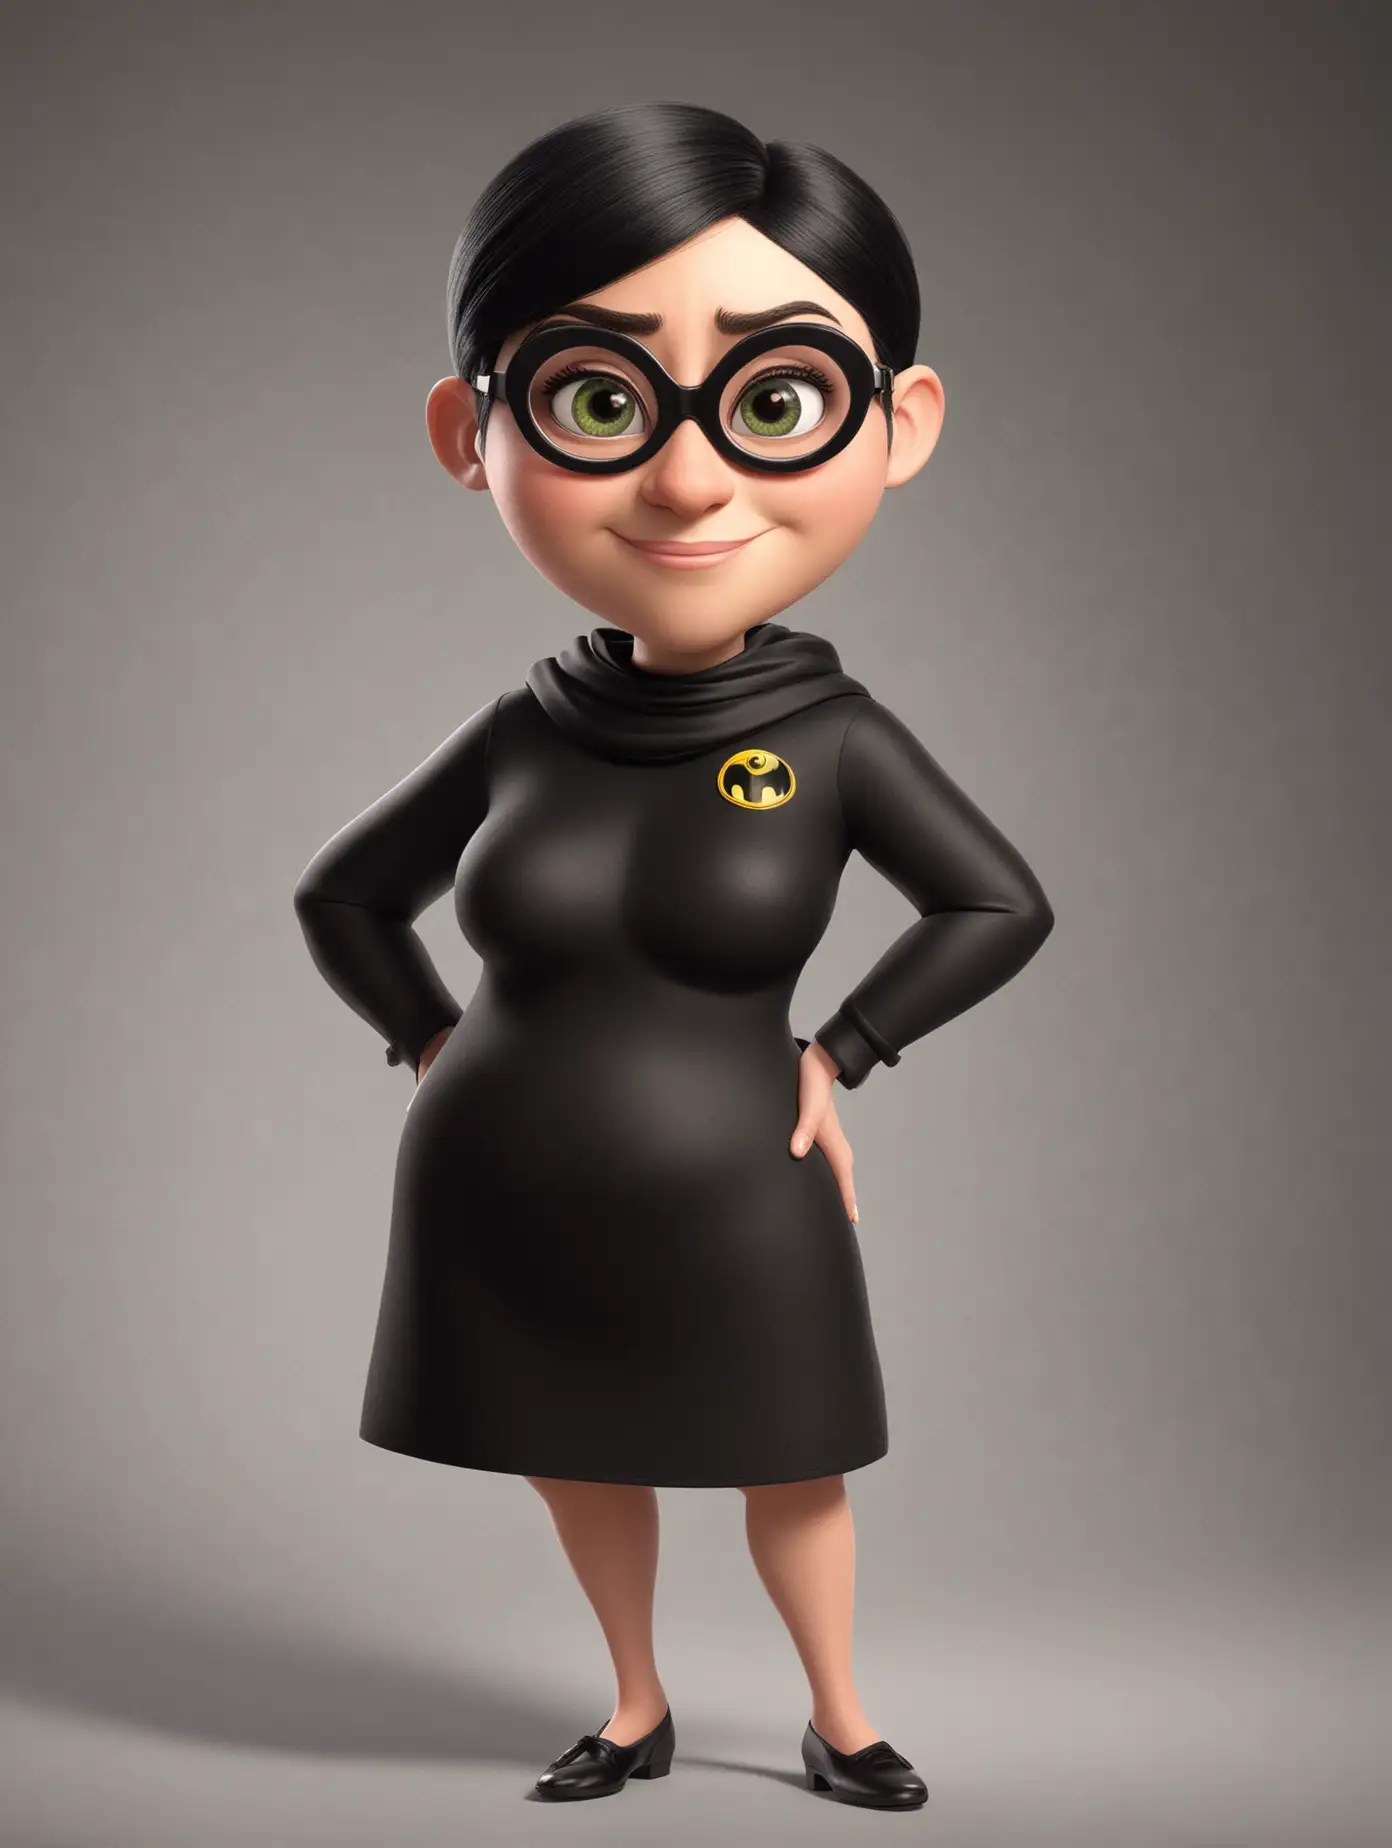 edna from the Incredibles 